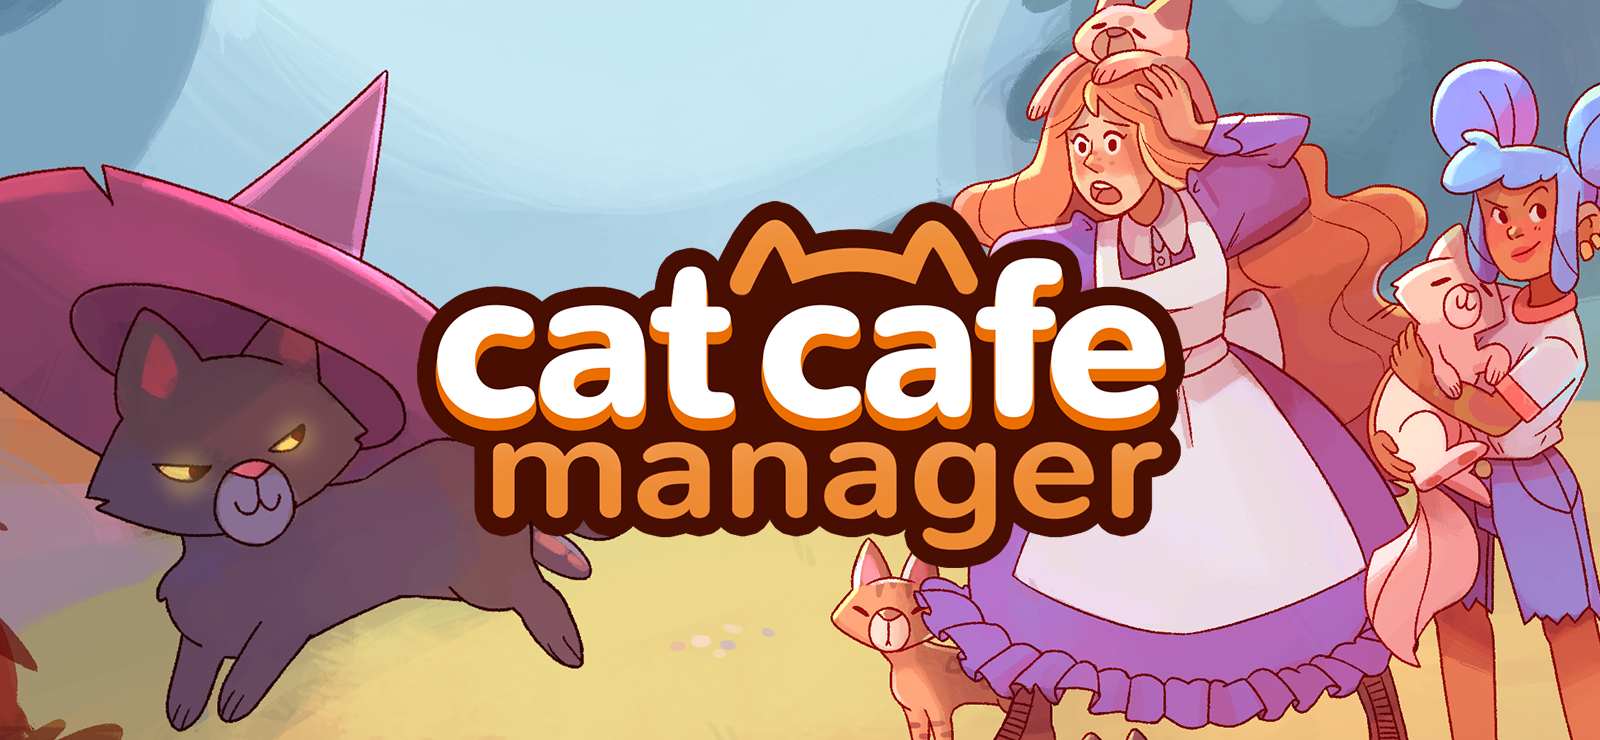 Cat Cafe Manager